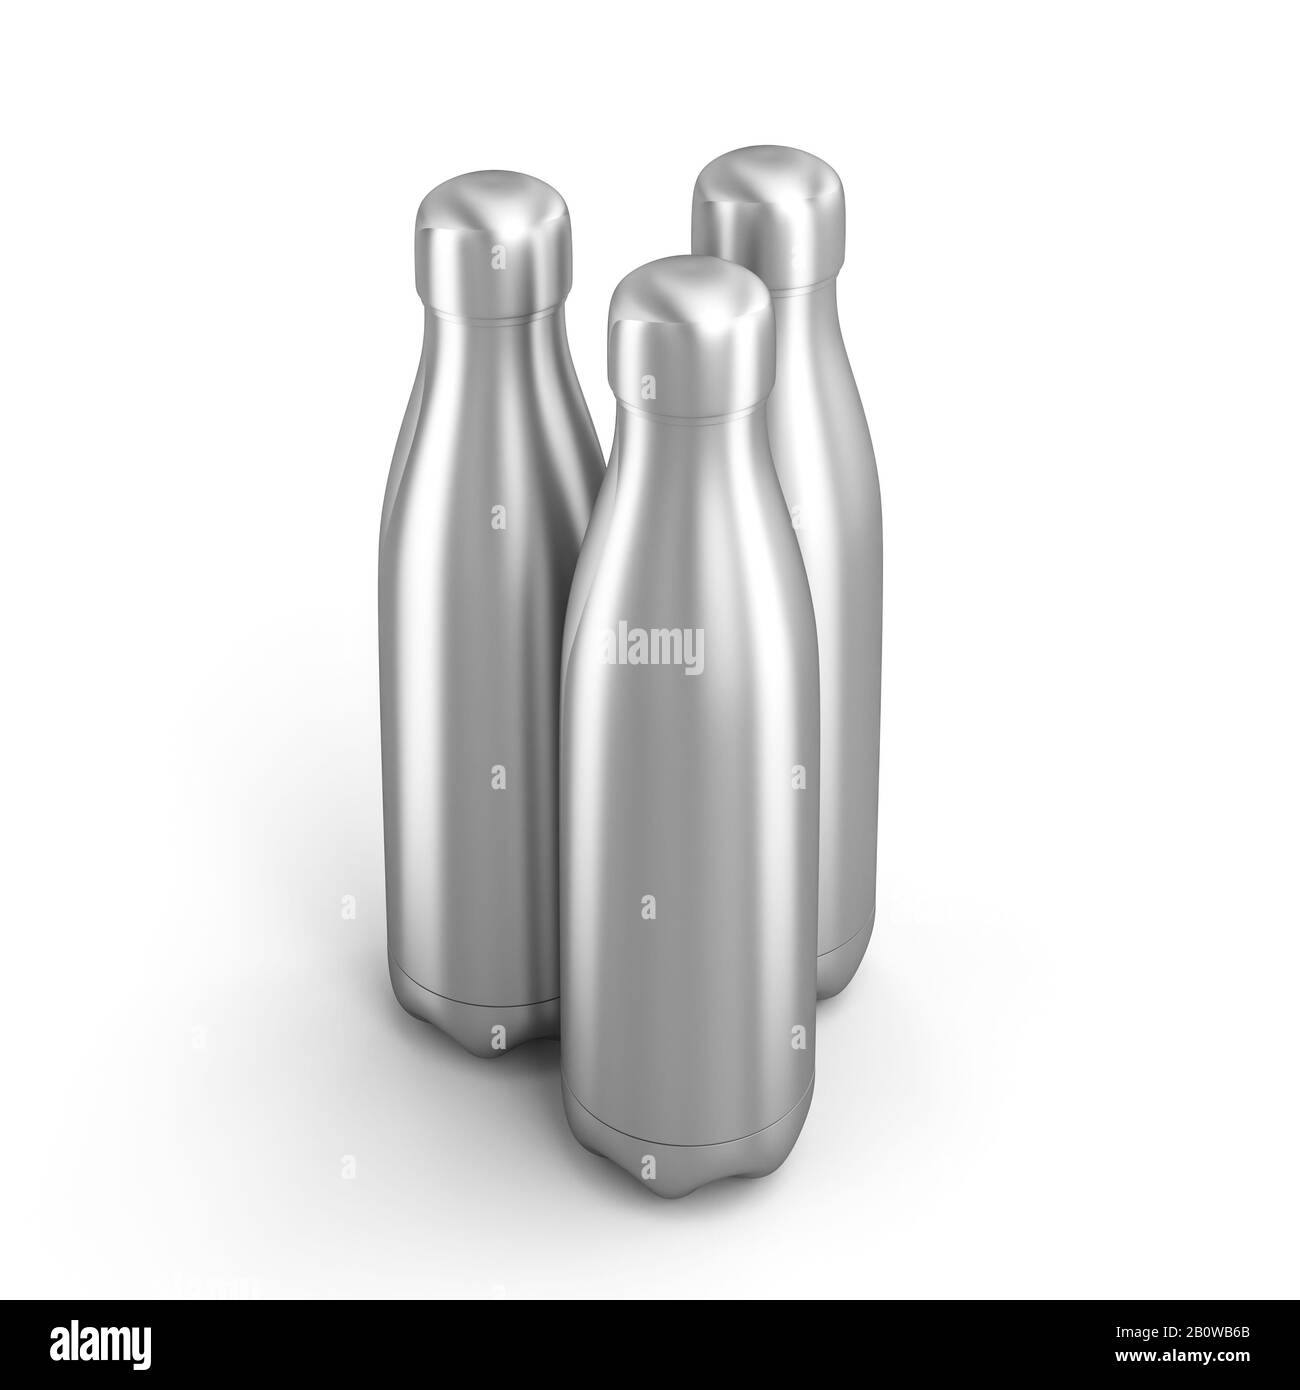 3d render image of 3 reusable steel bottles. nobody around. square format. eco-sustainability concept. Stock Photo